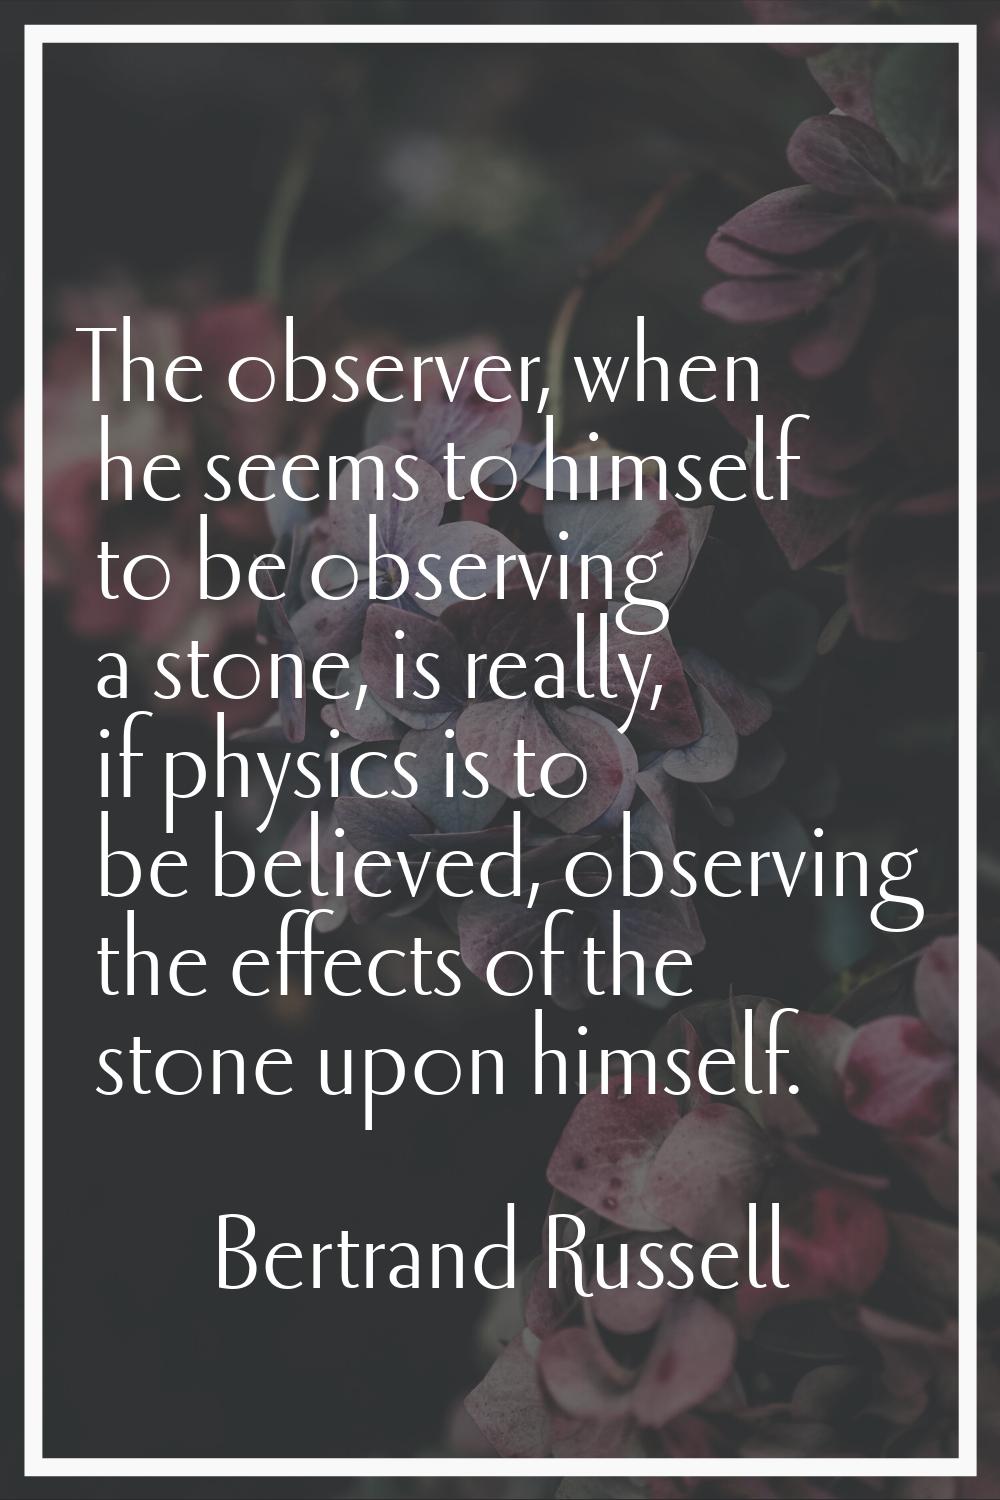 The observer, when he seems to himself to be observing a stone, is really, if physics is to be beli